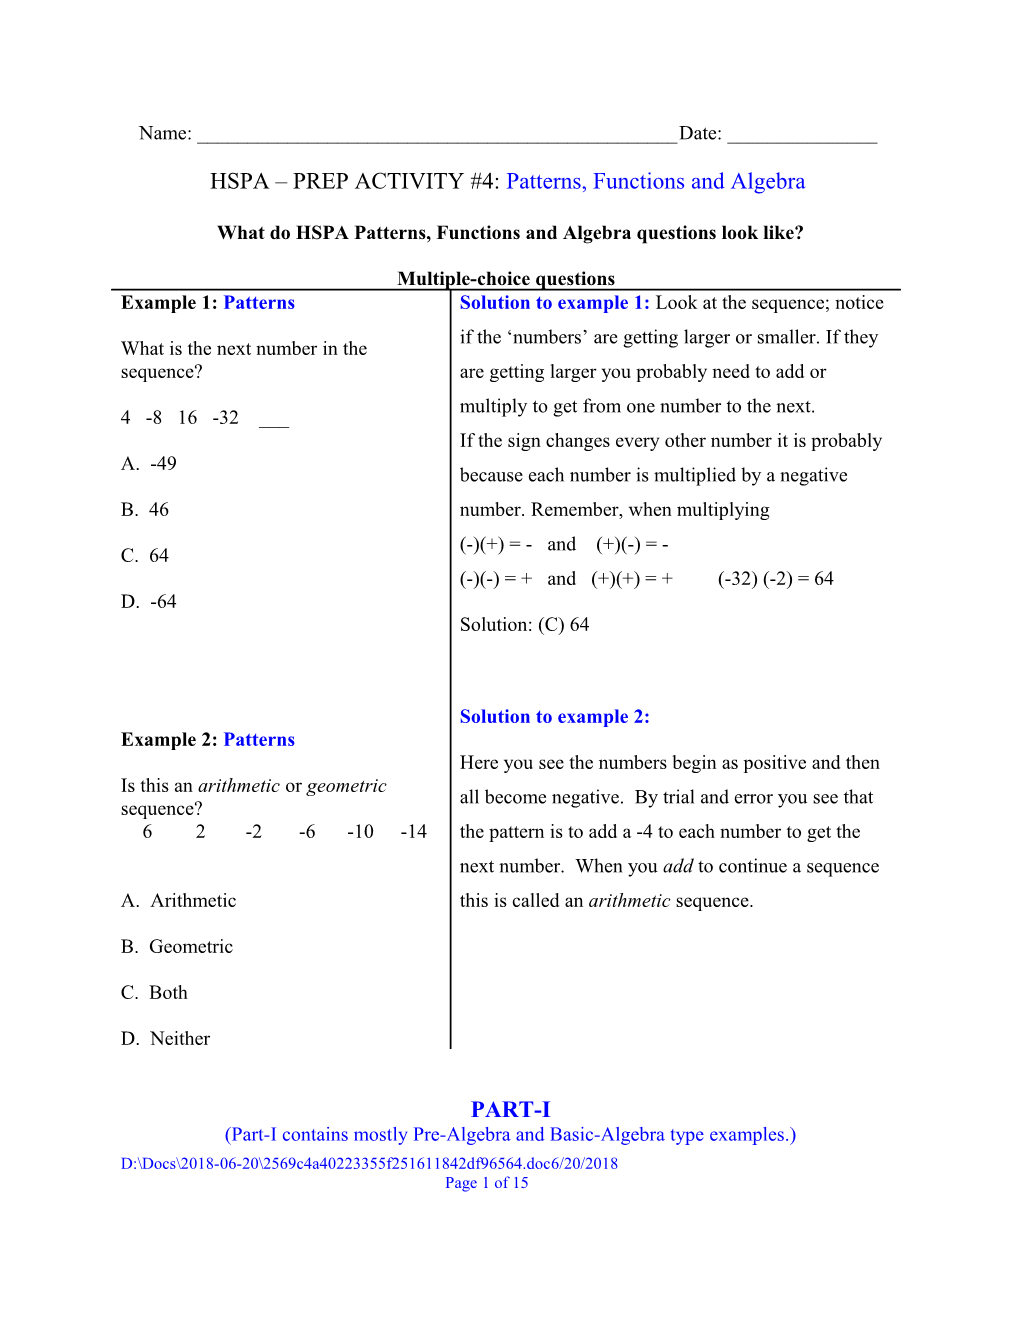 HSPA PREP ACTIVITY #4: Patterns, Functions and Algebra